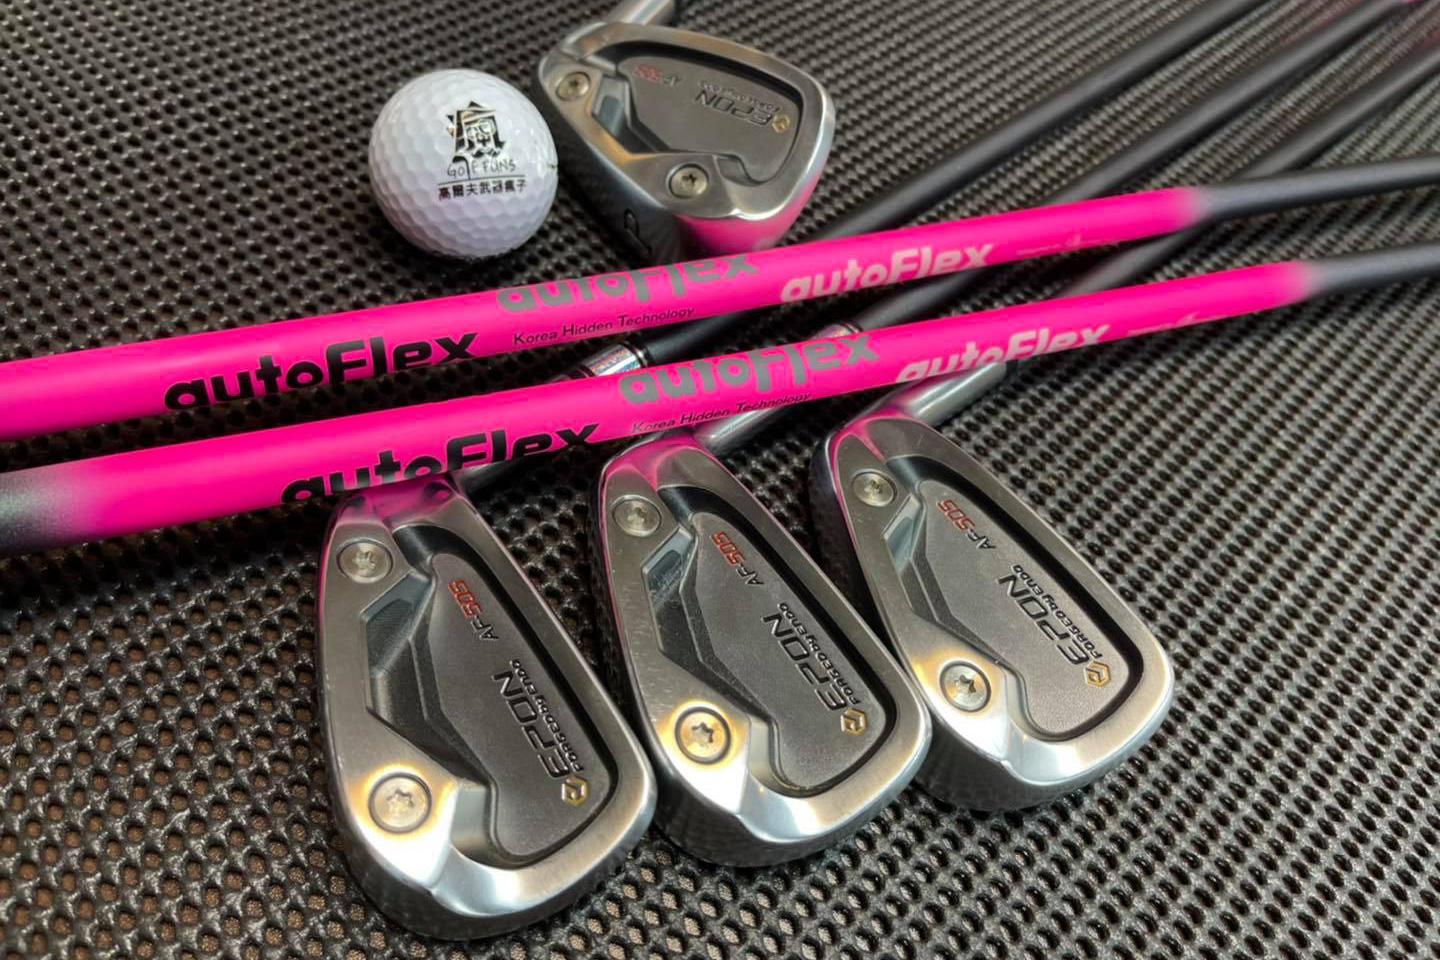 You are currently viewing Epon 505 + AutoFlex 505 iron